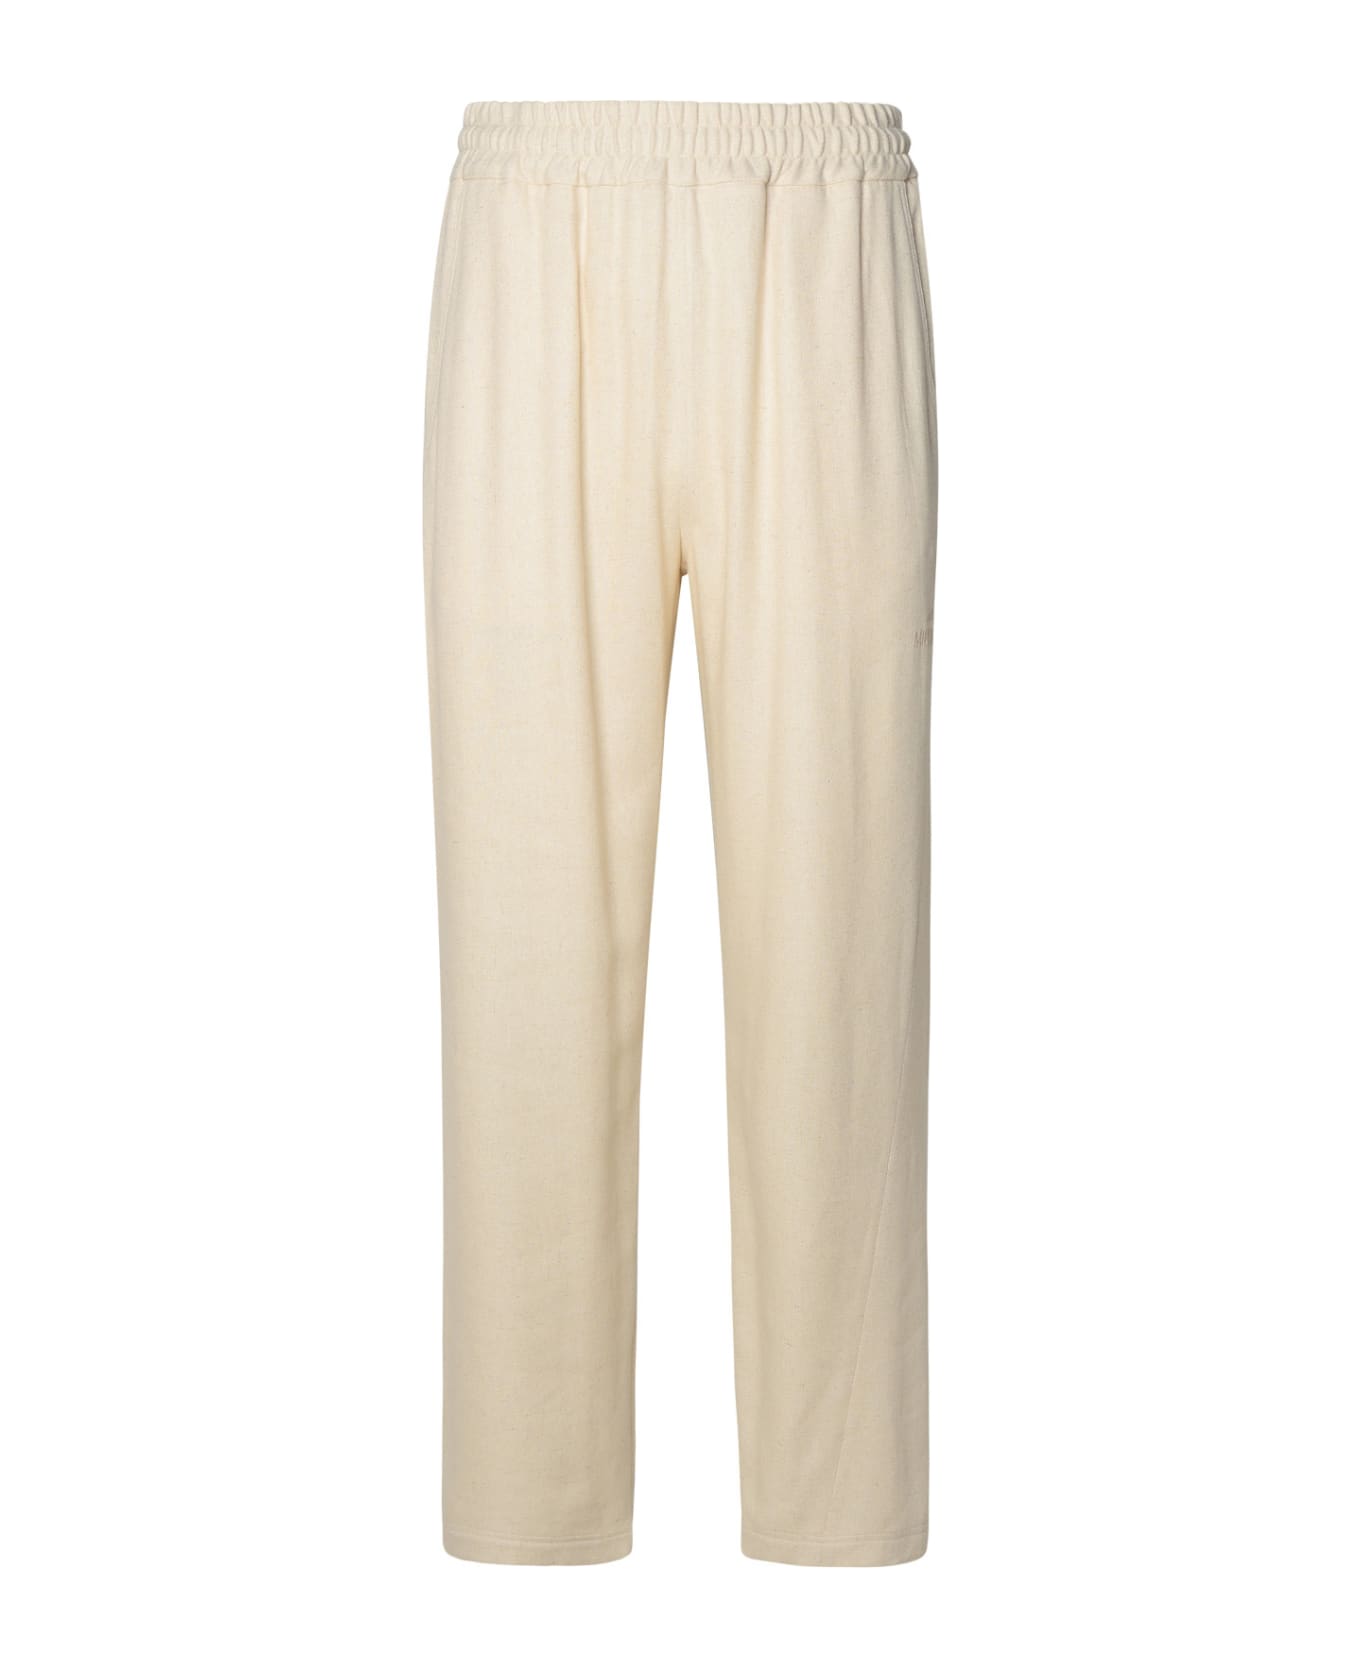 GCDS Ivory Linen Blend Trousers - Off White ボトムス